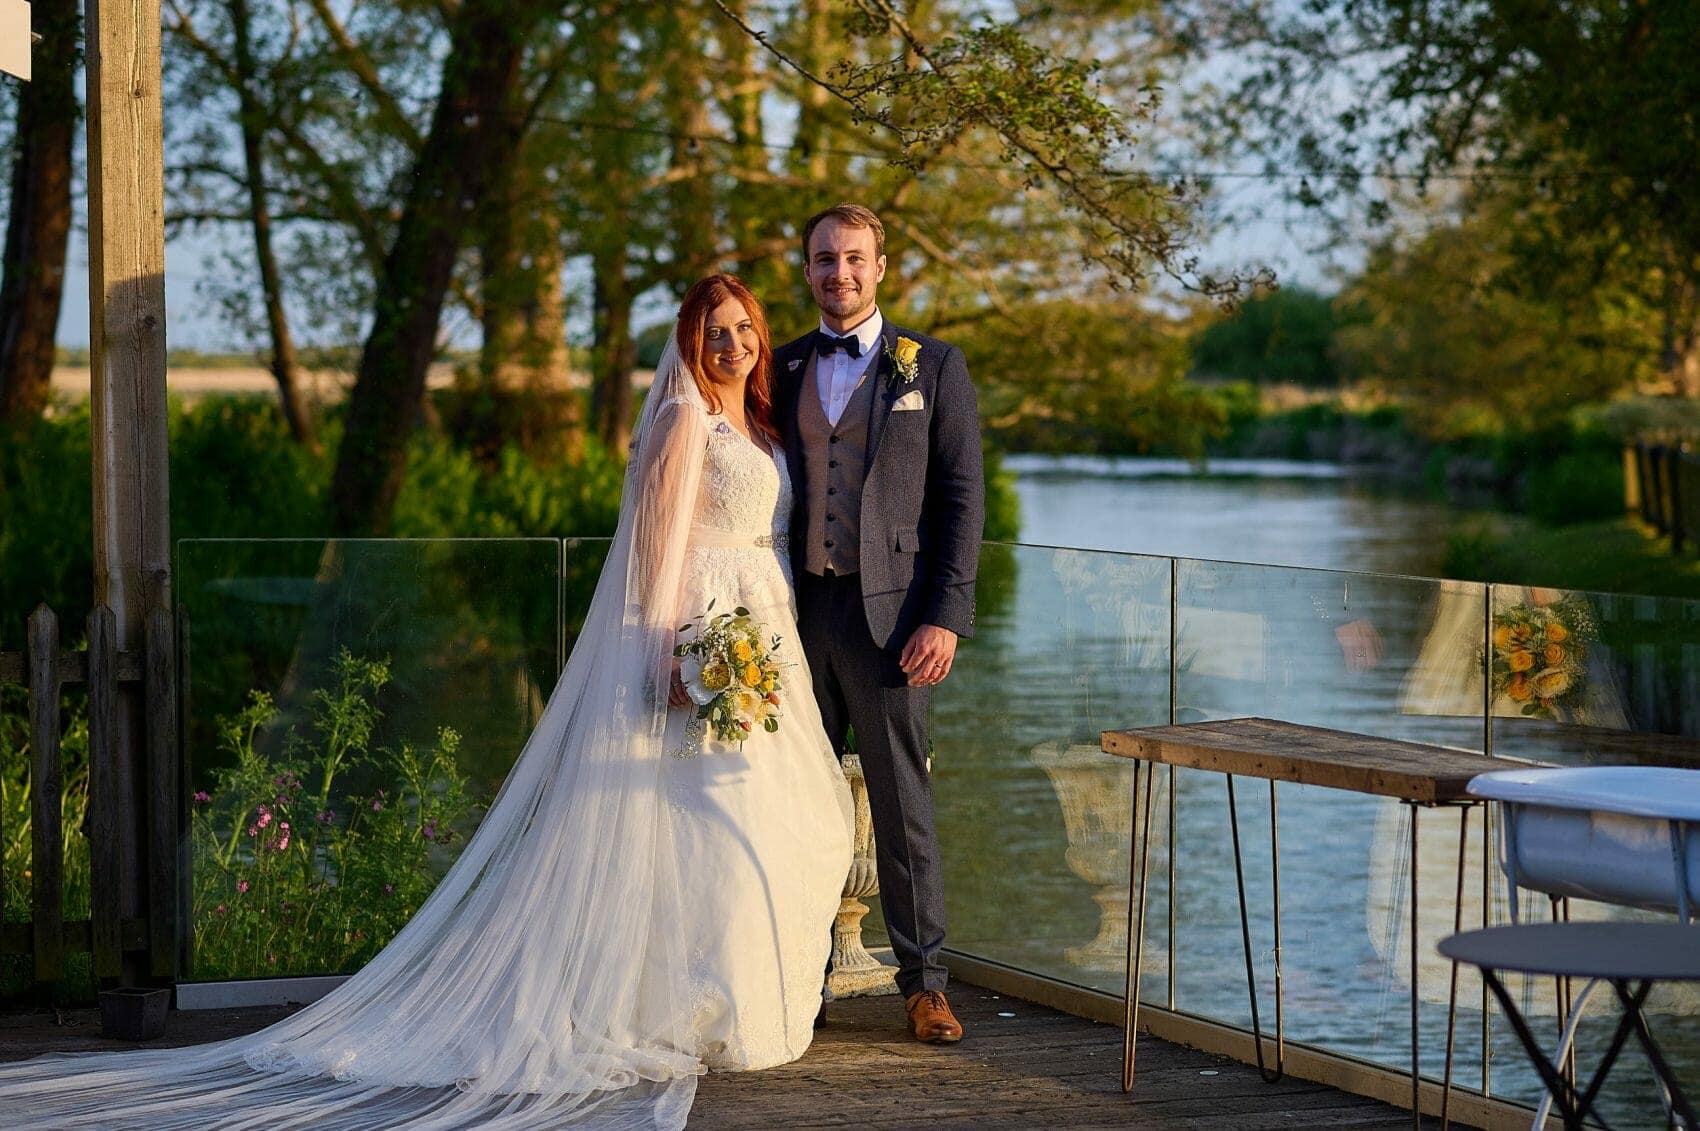 Sopley Mill wedding photographer - Bride and Groom pose by the River